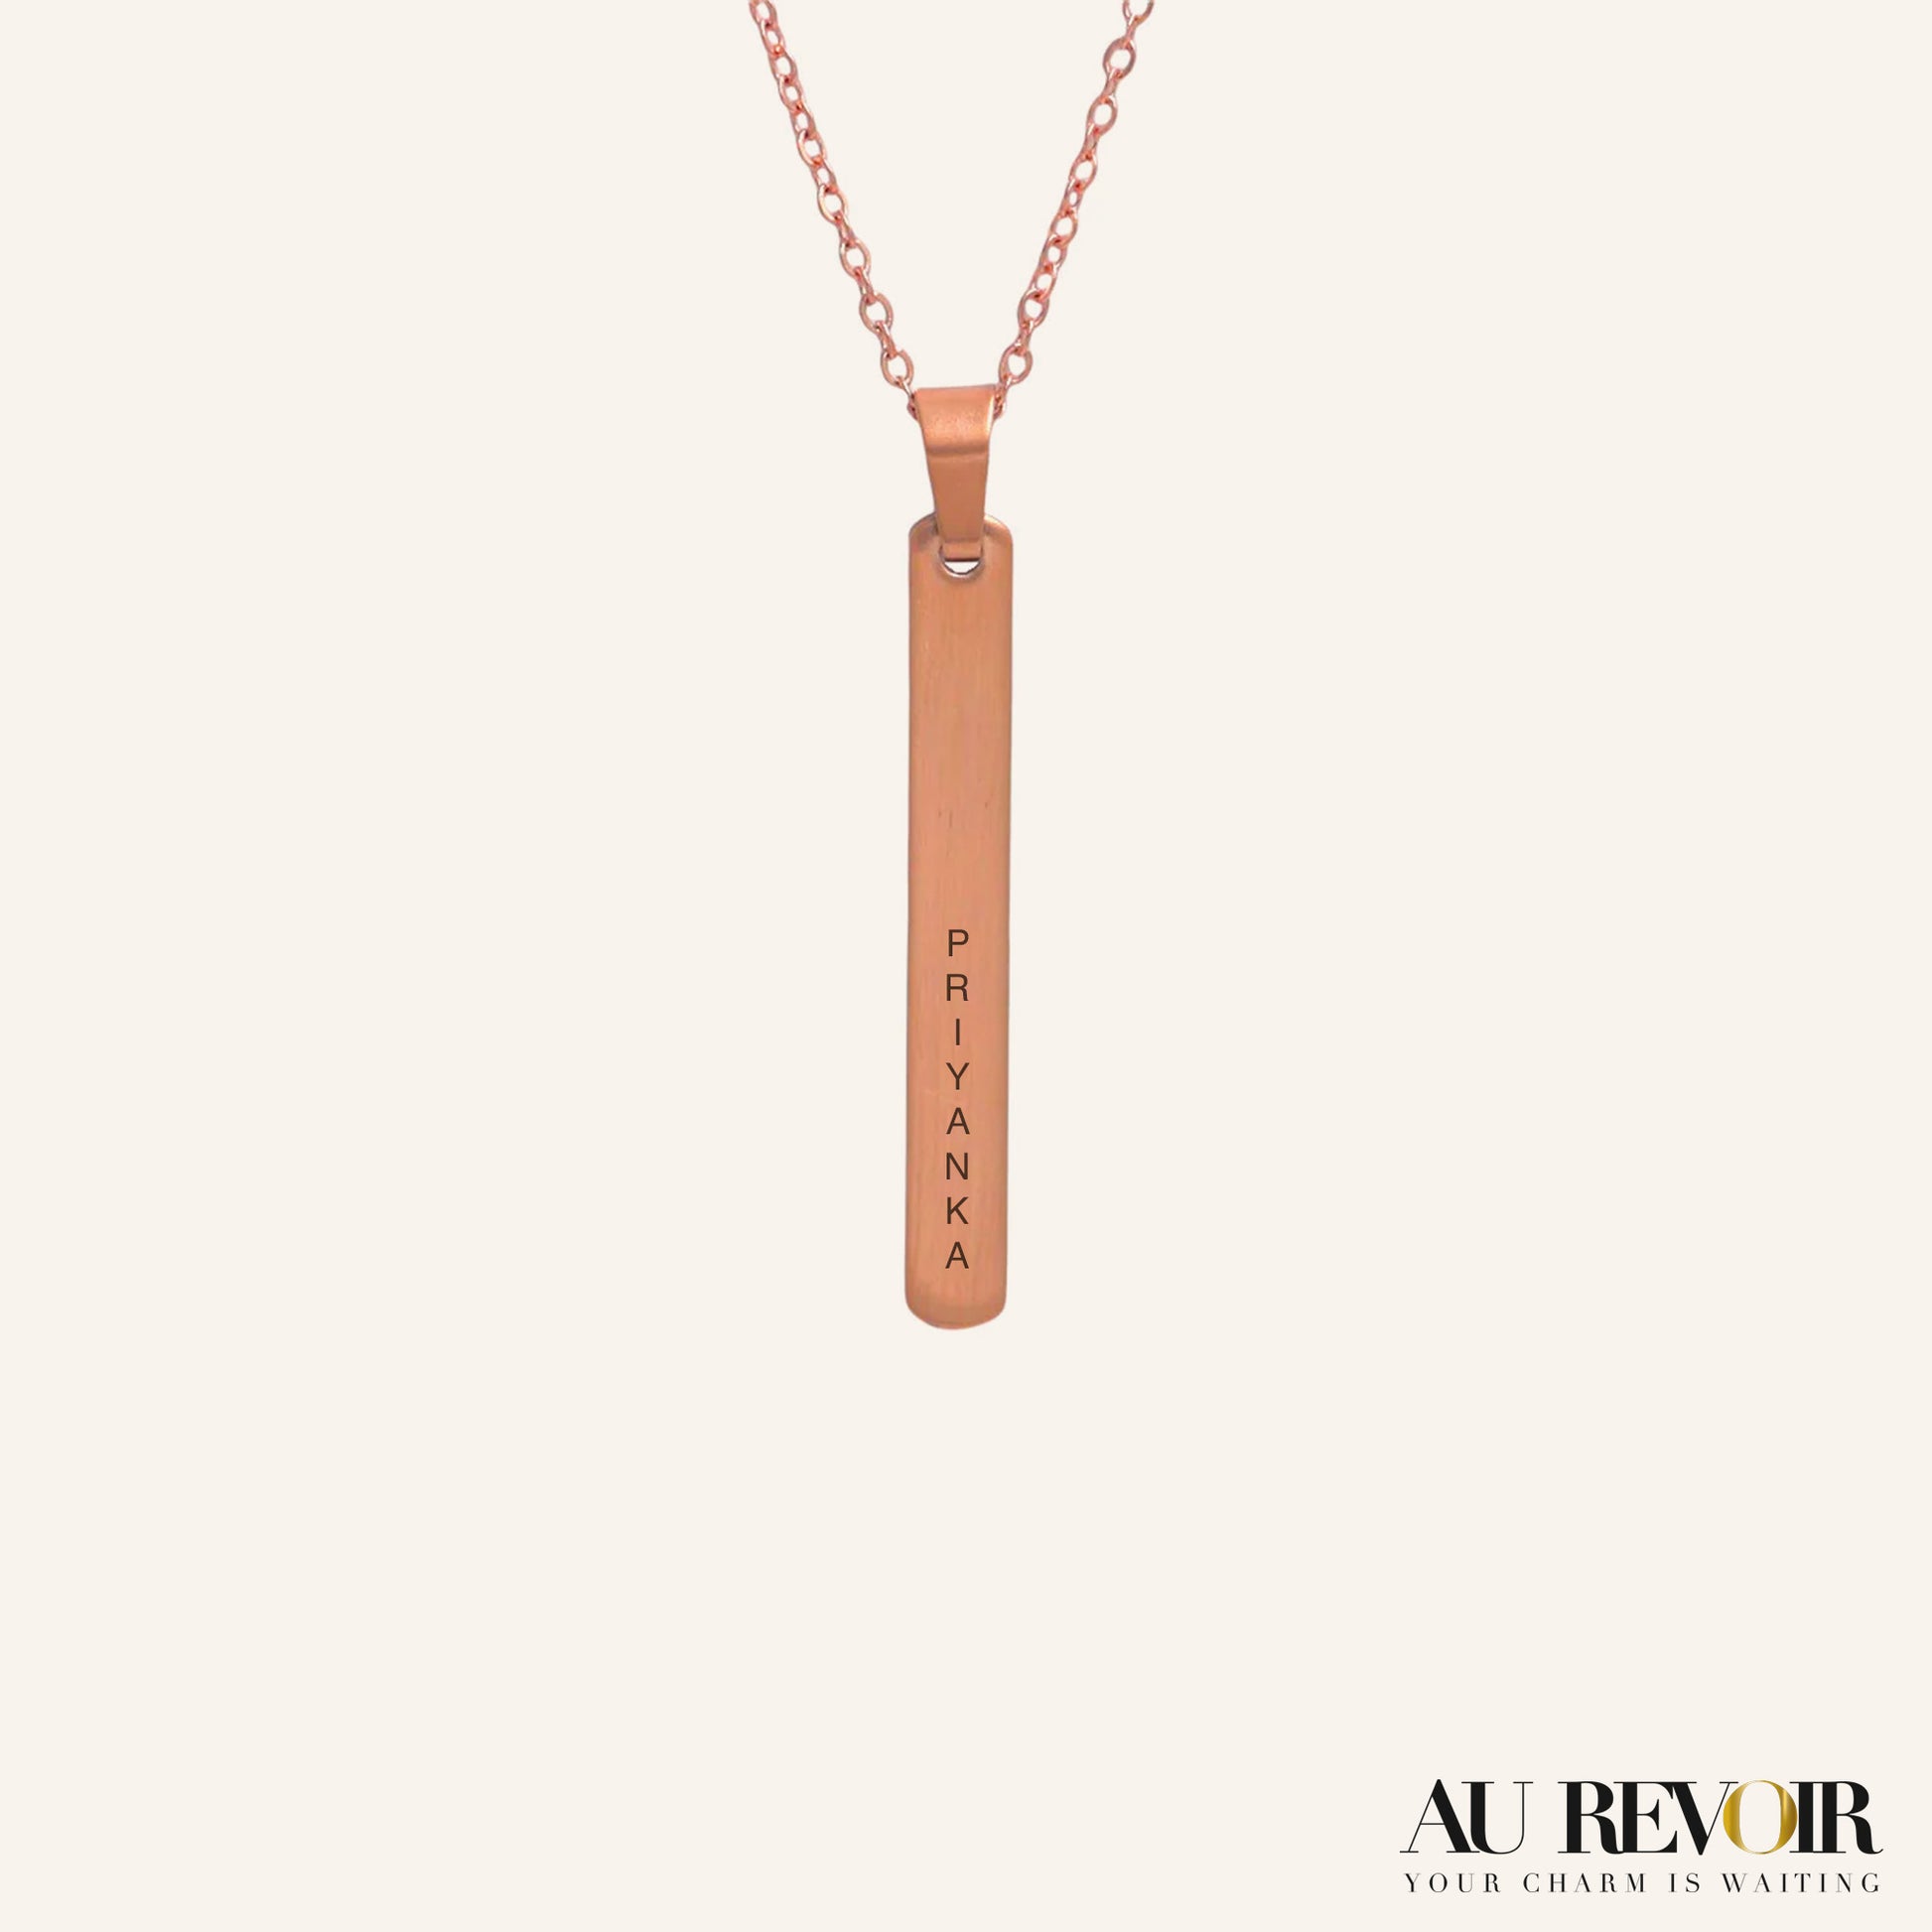 Gold pendant personalised custom name engraving stainless steel tile pendant stainless steel necklace rose gold necklace wearable jewelry 